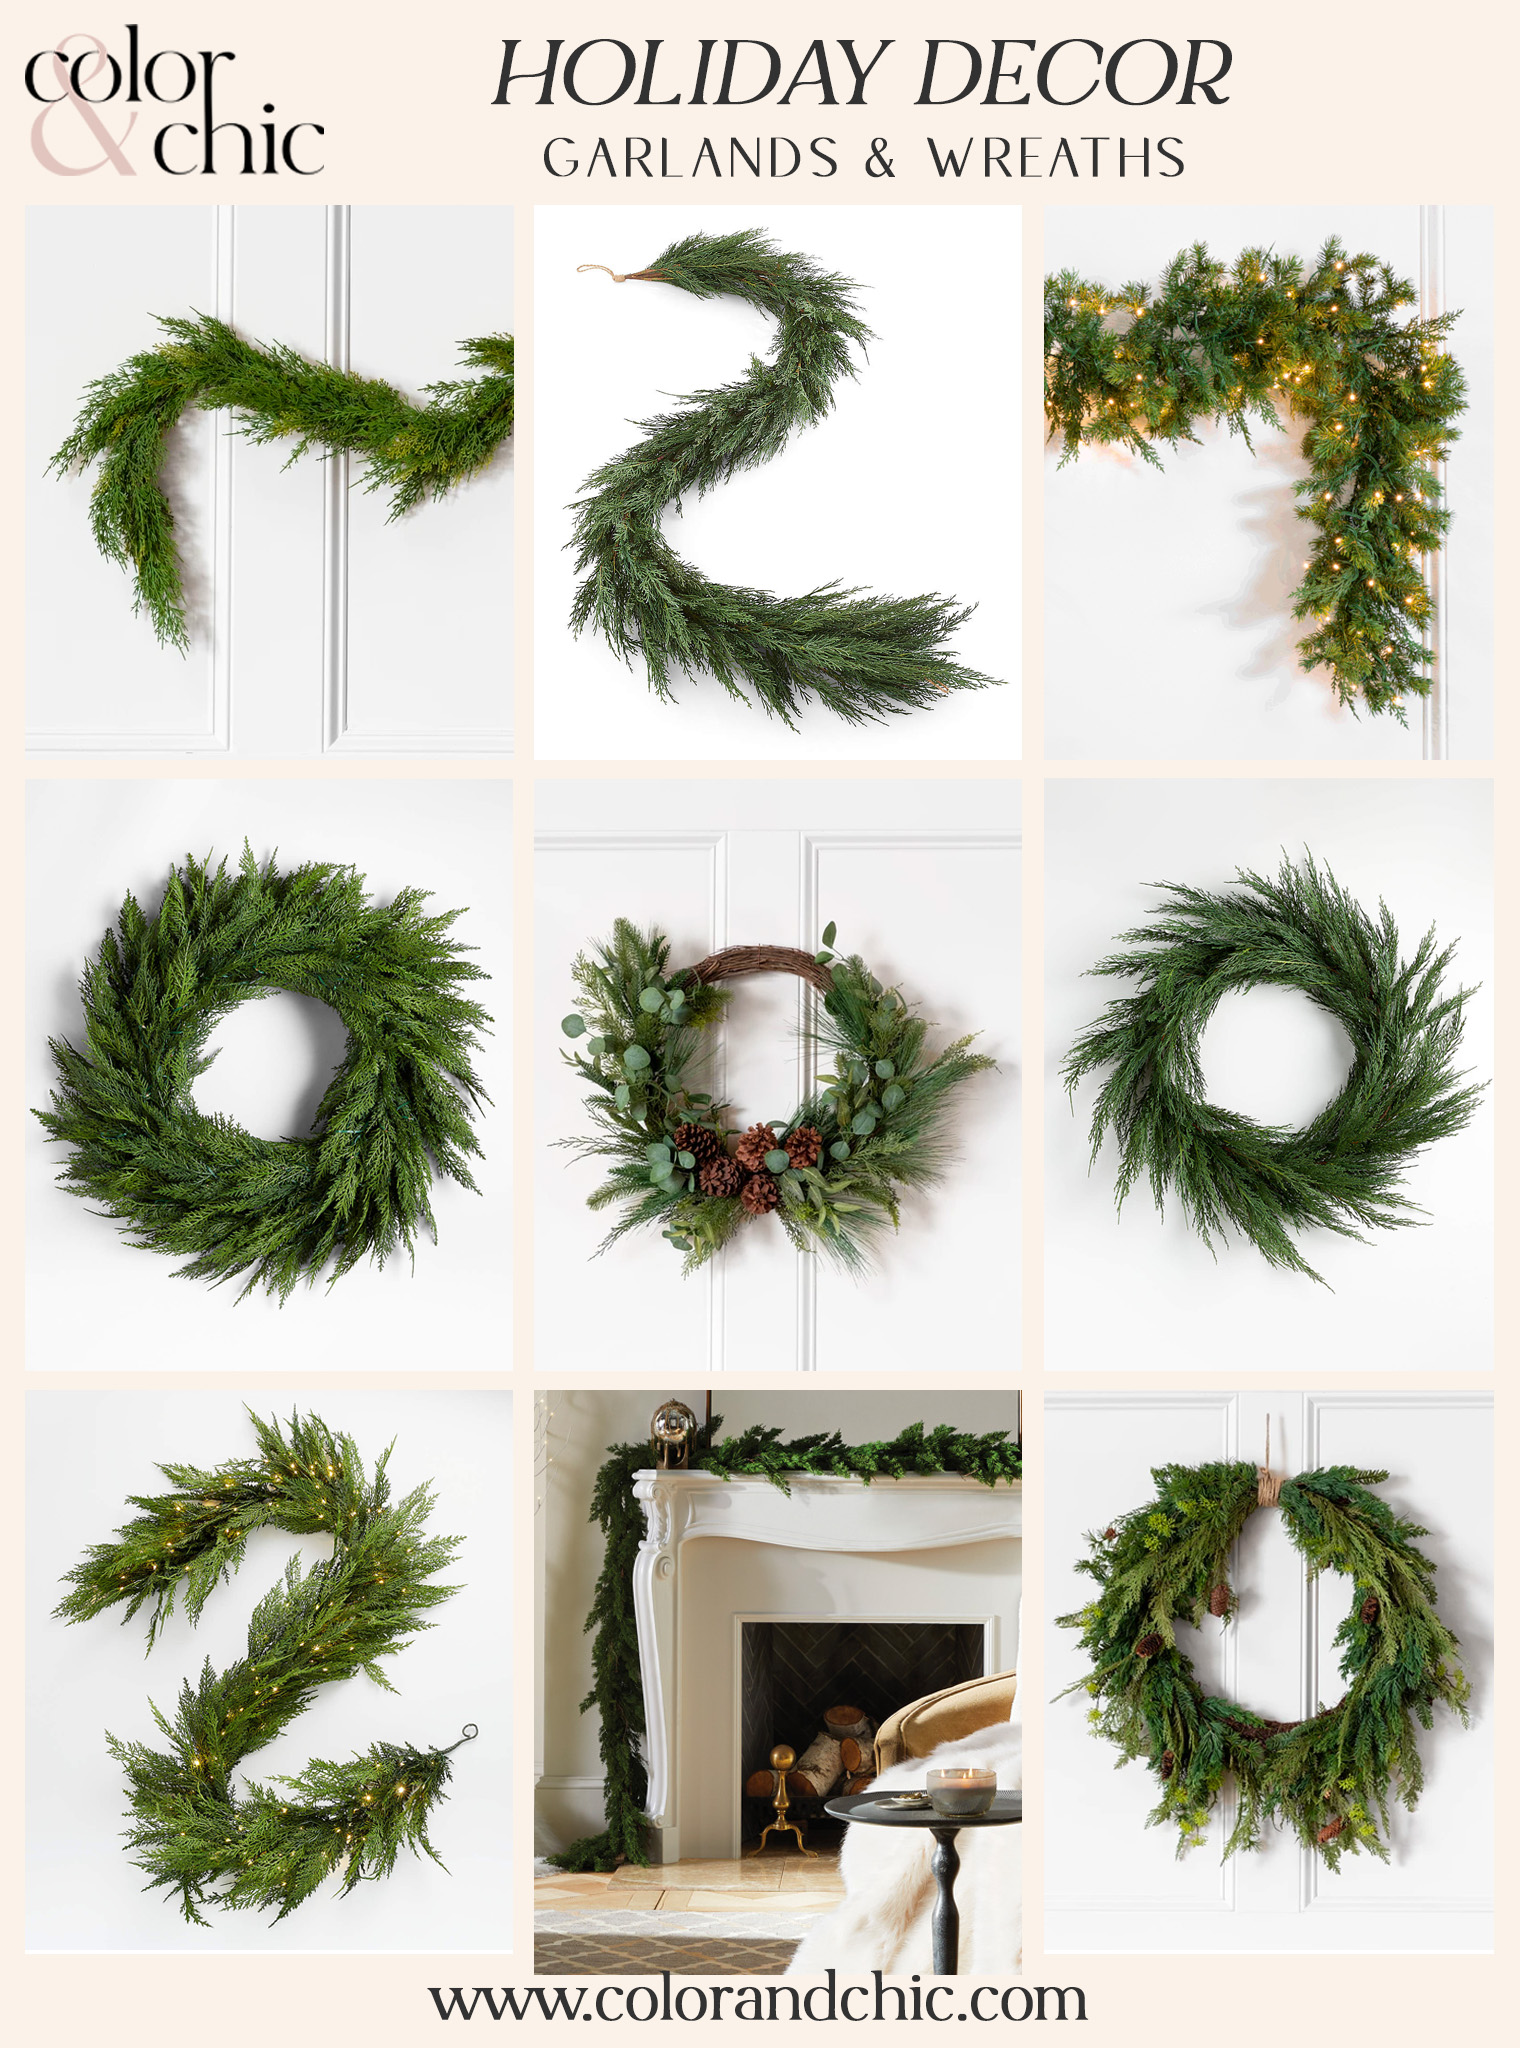 Christmas decor ideas including garlands and wreaths from blogger Hoang-Kim Cung